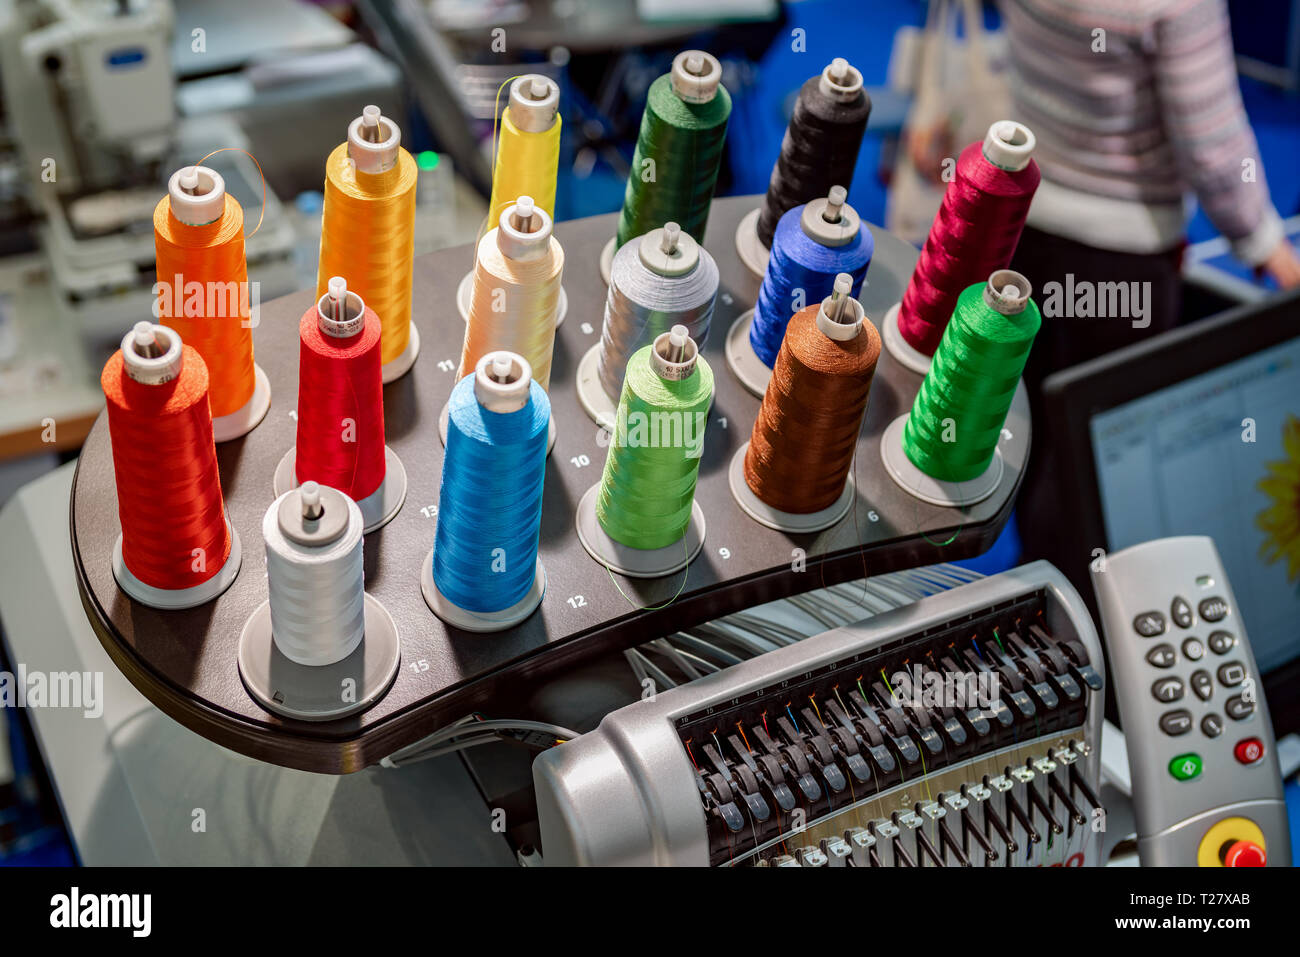 Automatic industrial sewing machine for stitch by digital pattern. Modern textile industry. Stock Photo